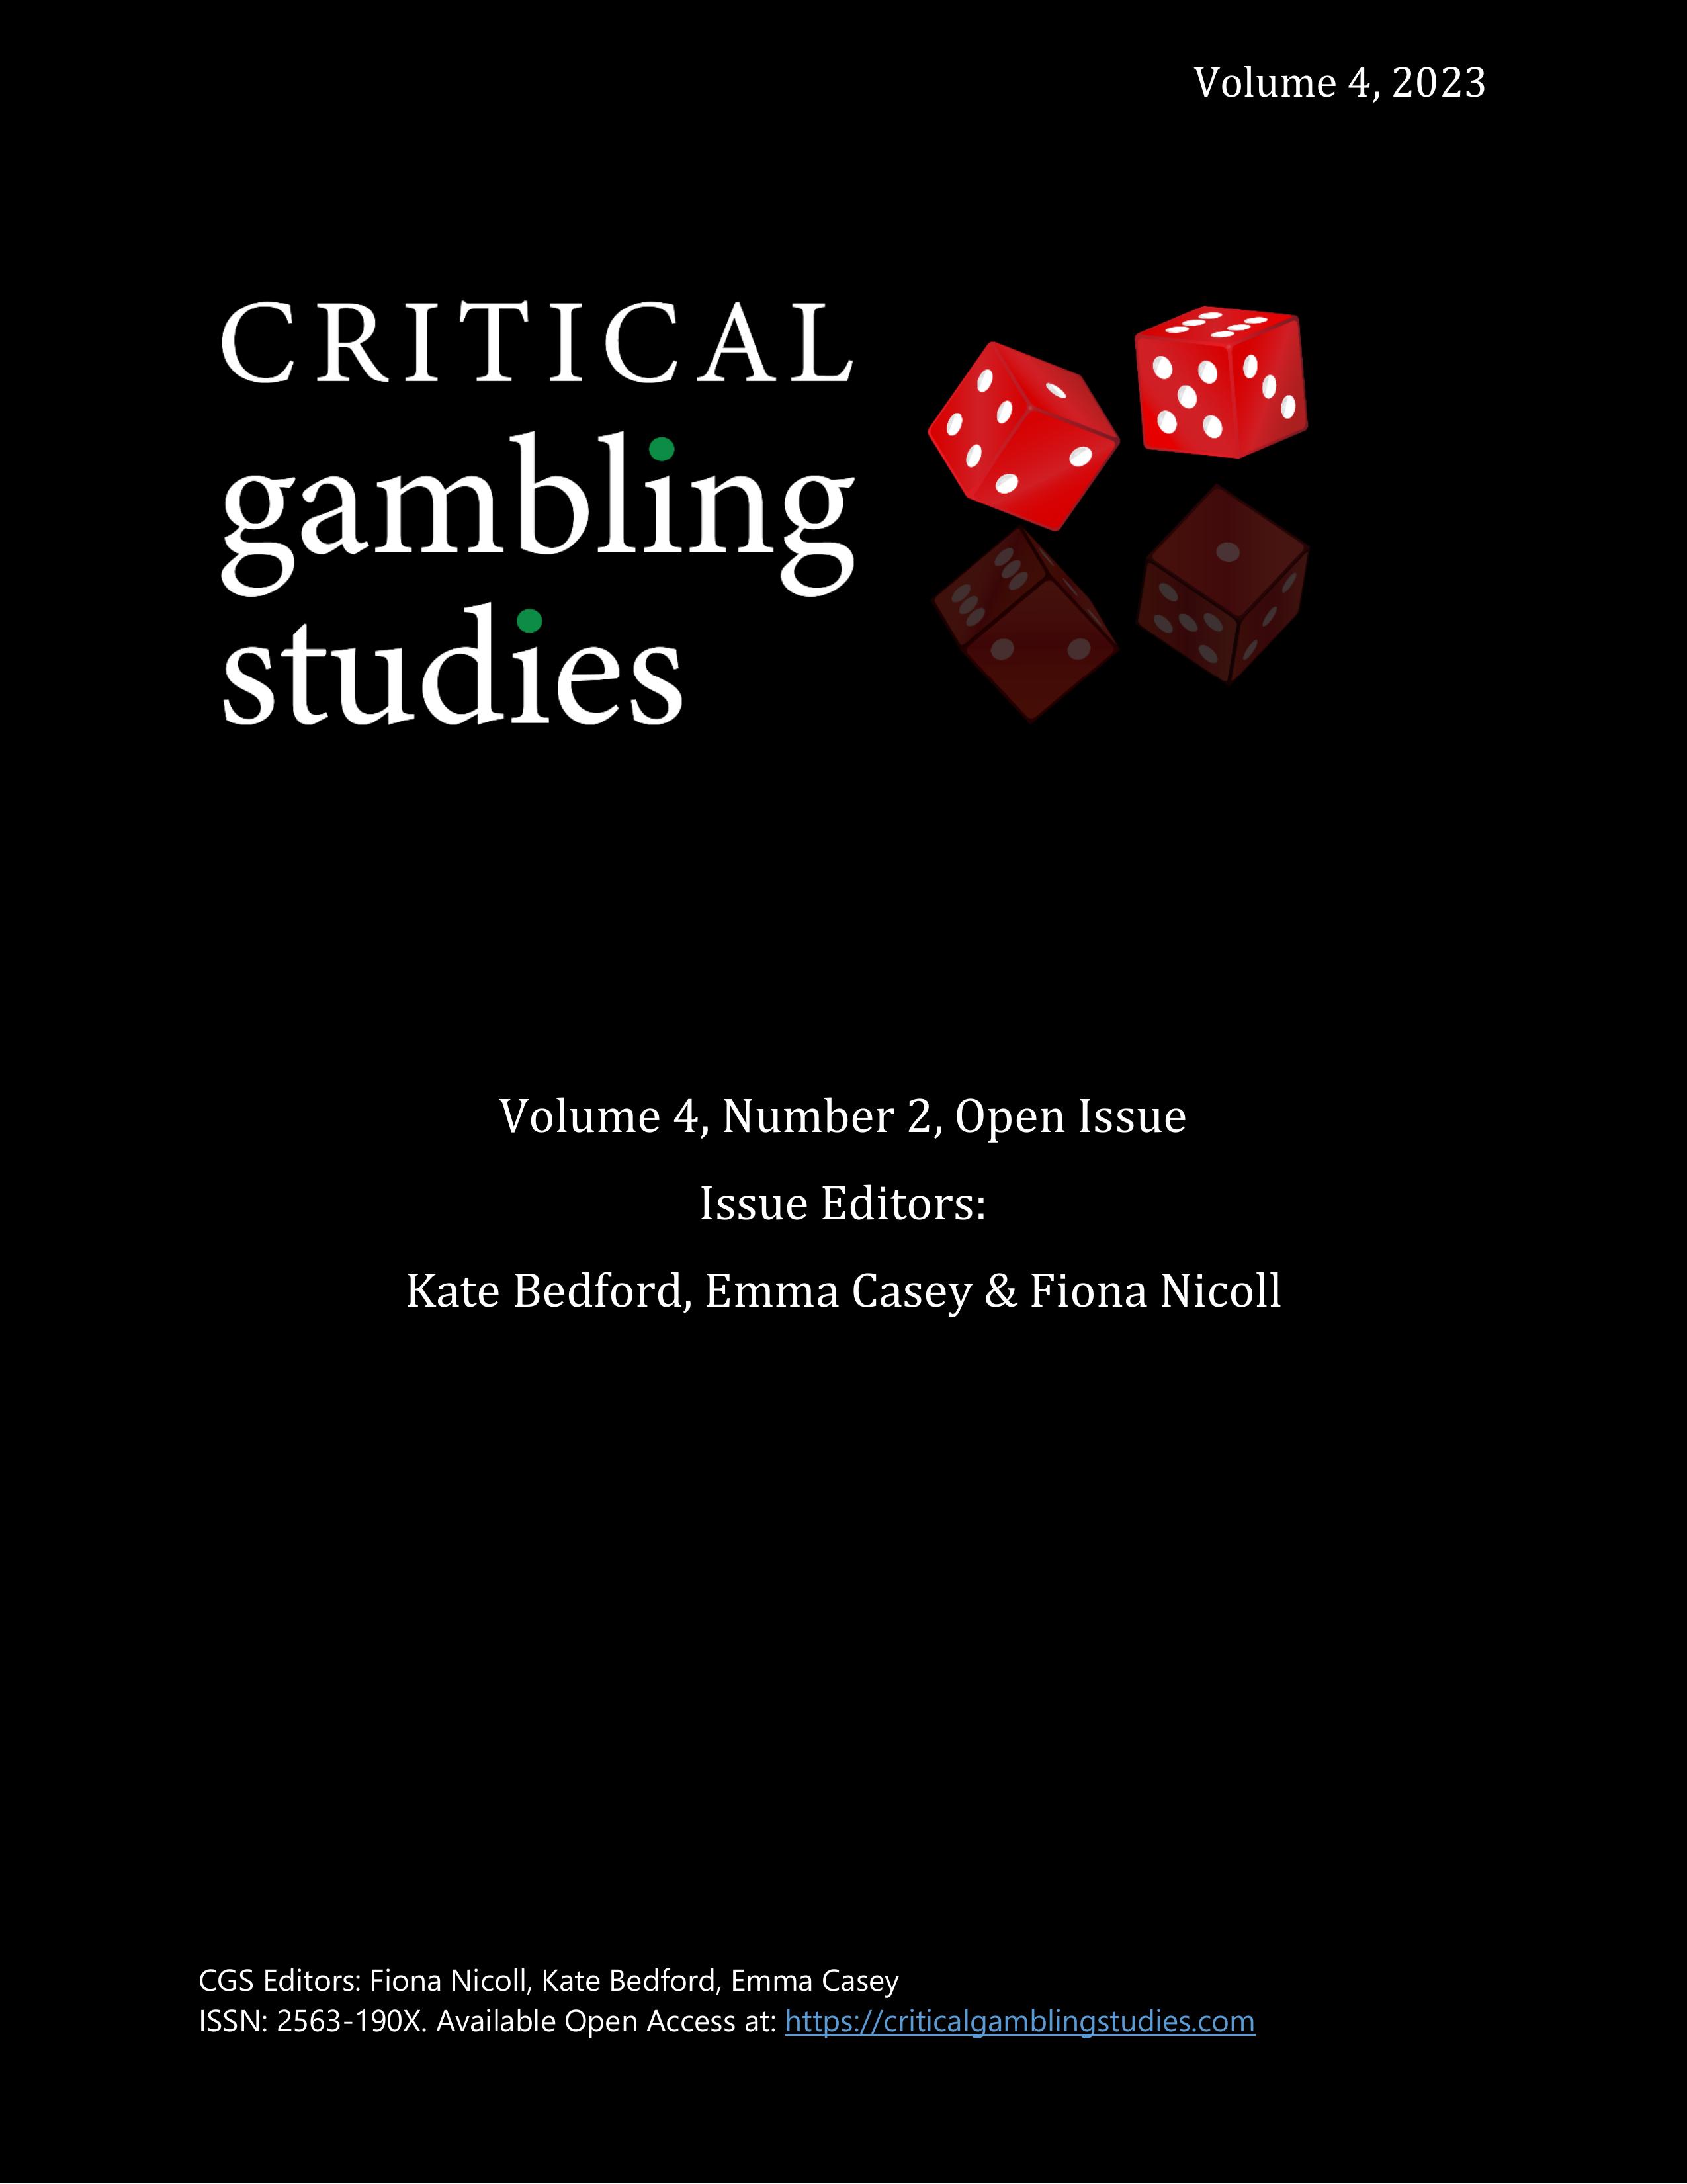 This is the cover page for this journal. It shows the title of the journal Critical Gambling Studies, two red dice with white dots for numbers, the information of this issue, and the names of the editors.